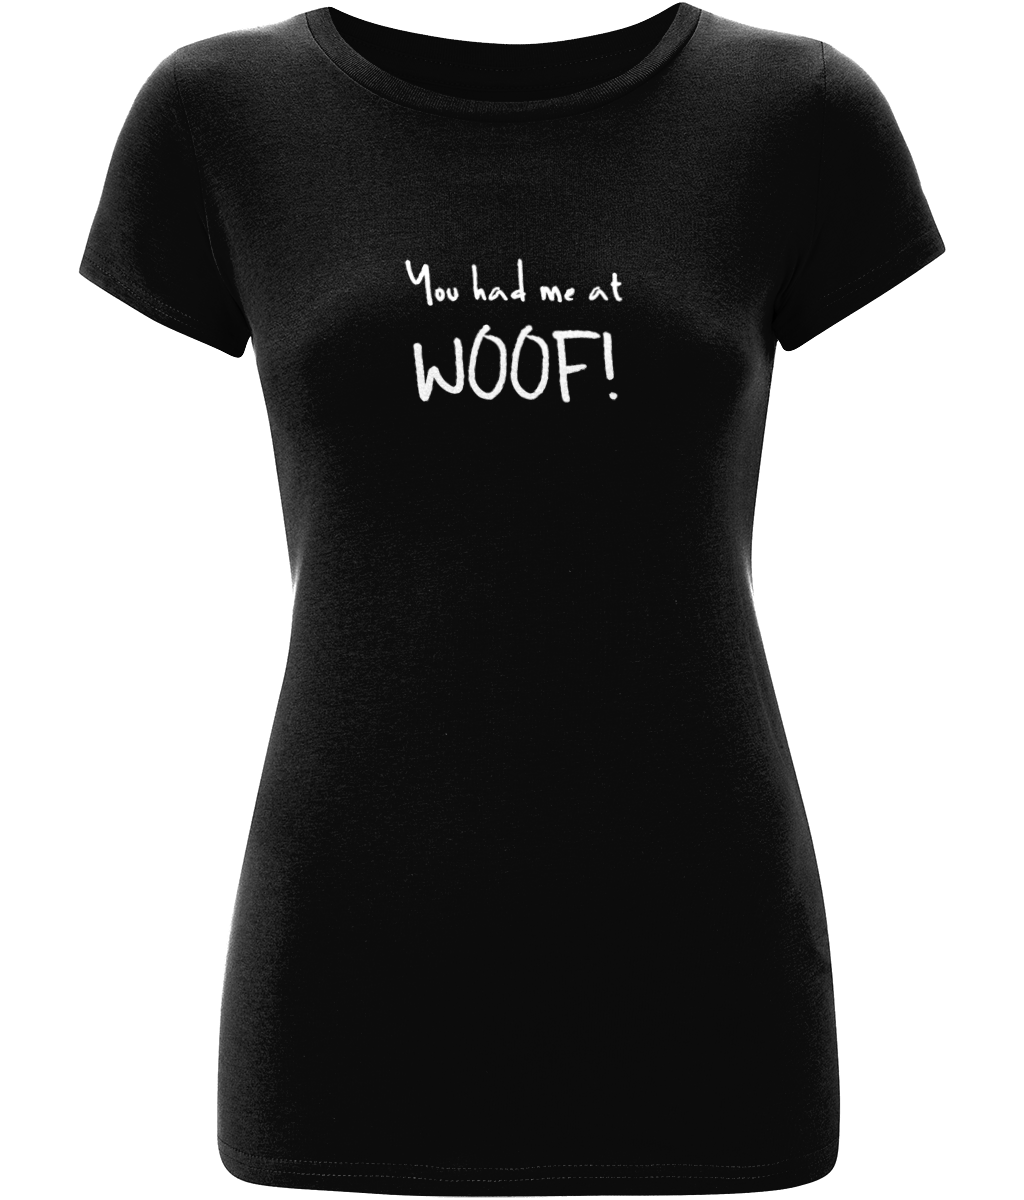 You had me at WOOF! Organic Fitted T - Black